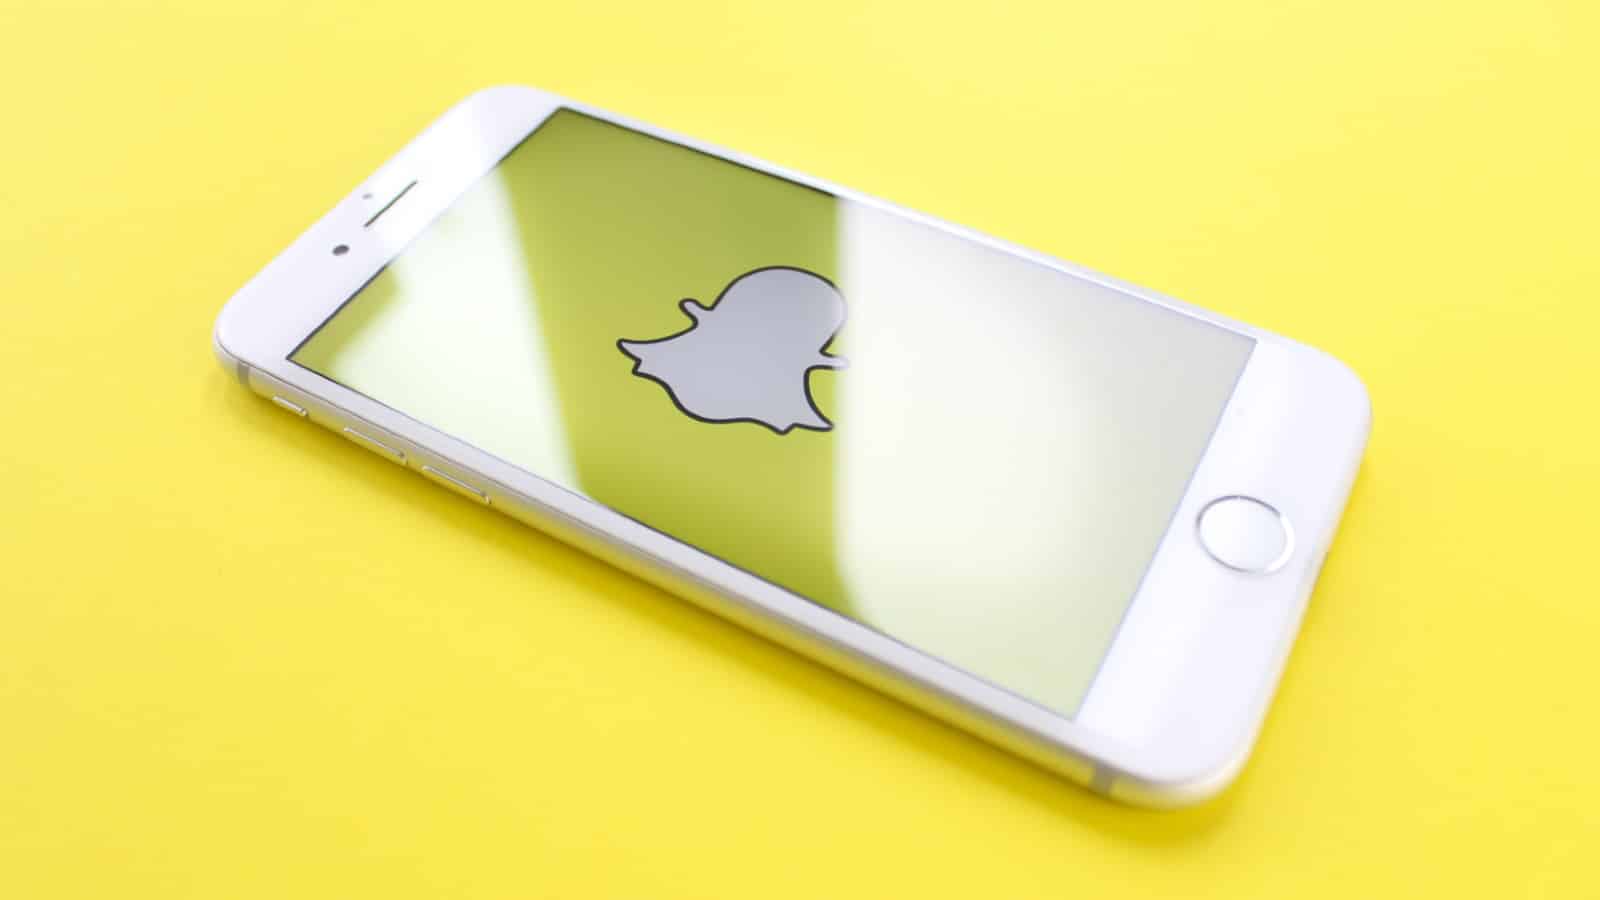 david atkinson recommends why would a married man use snapchat pic